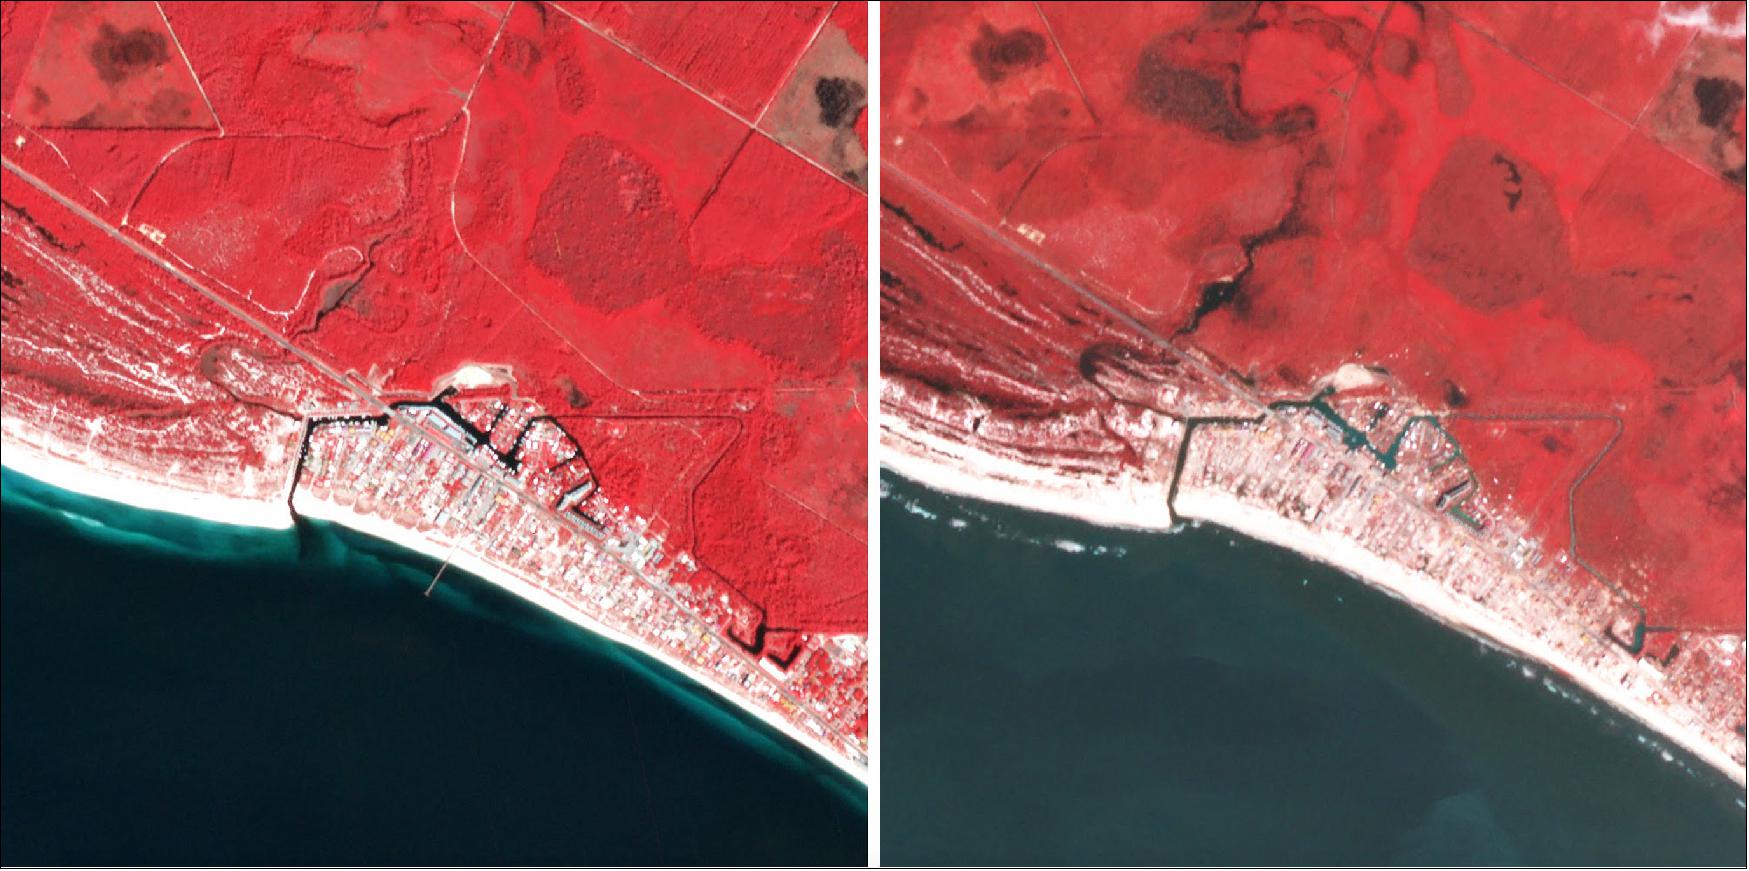 Figure 7: These two false color PlanetScope images show the direct aftermath of Hurricane Michael on the coastal community of Mexico Beach, Florida. In the second image, taken on October 11, 2018, the day after the hurricane made landfall it is possible to see large areas of damage and inland flooding throughout the community (image credit: Planet)